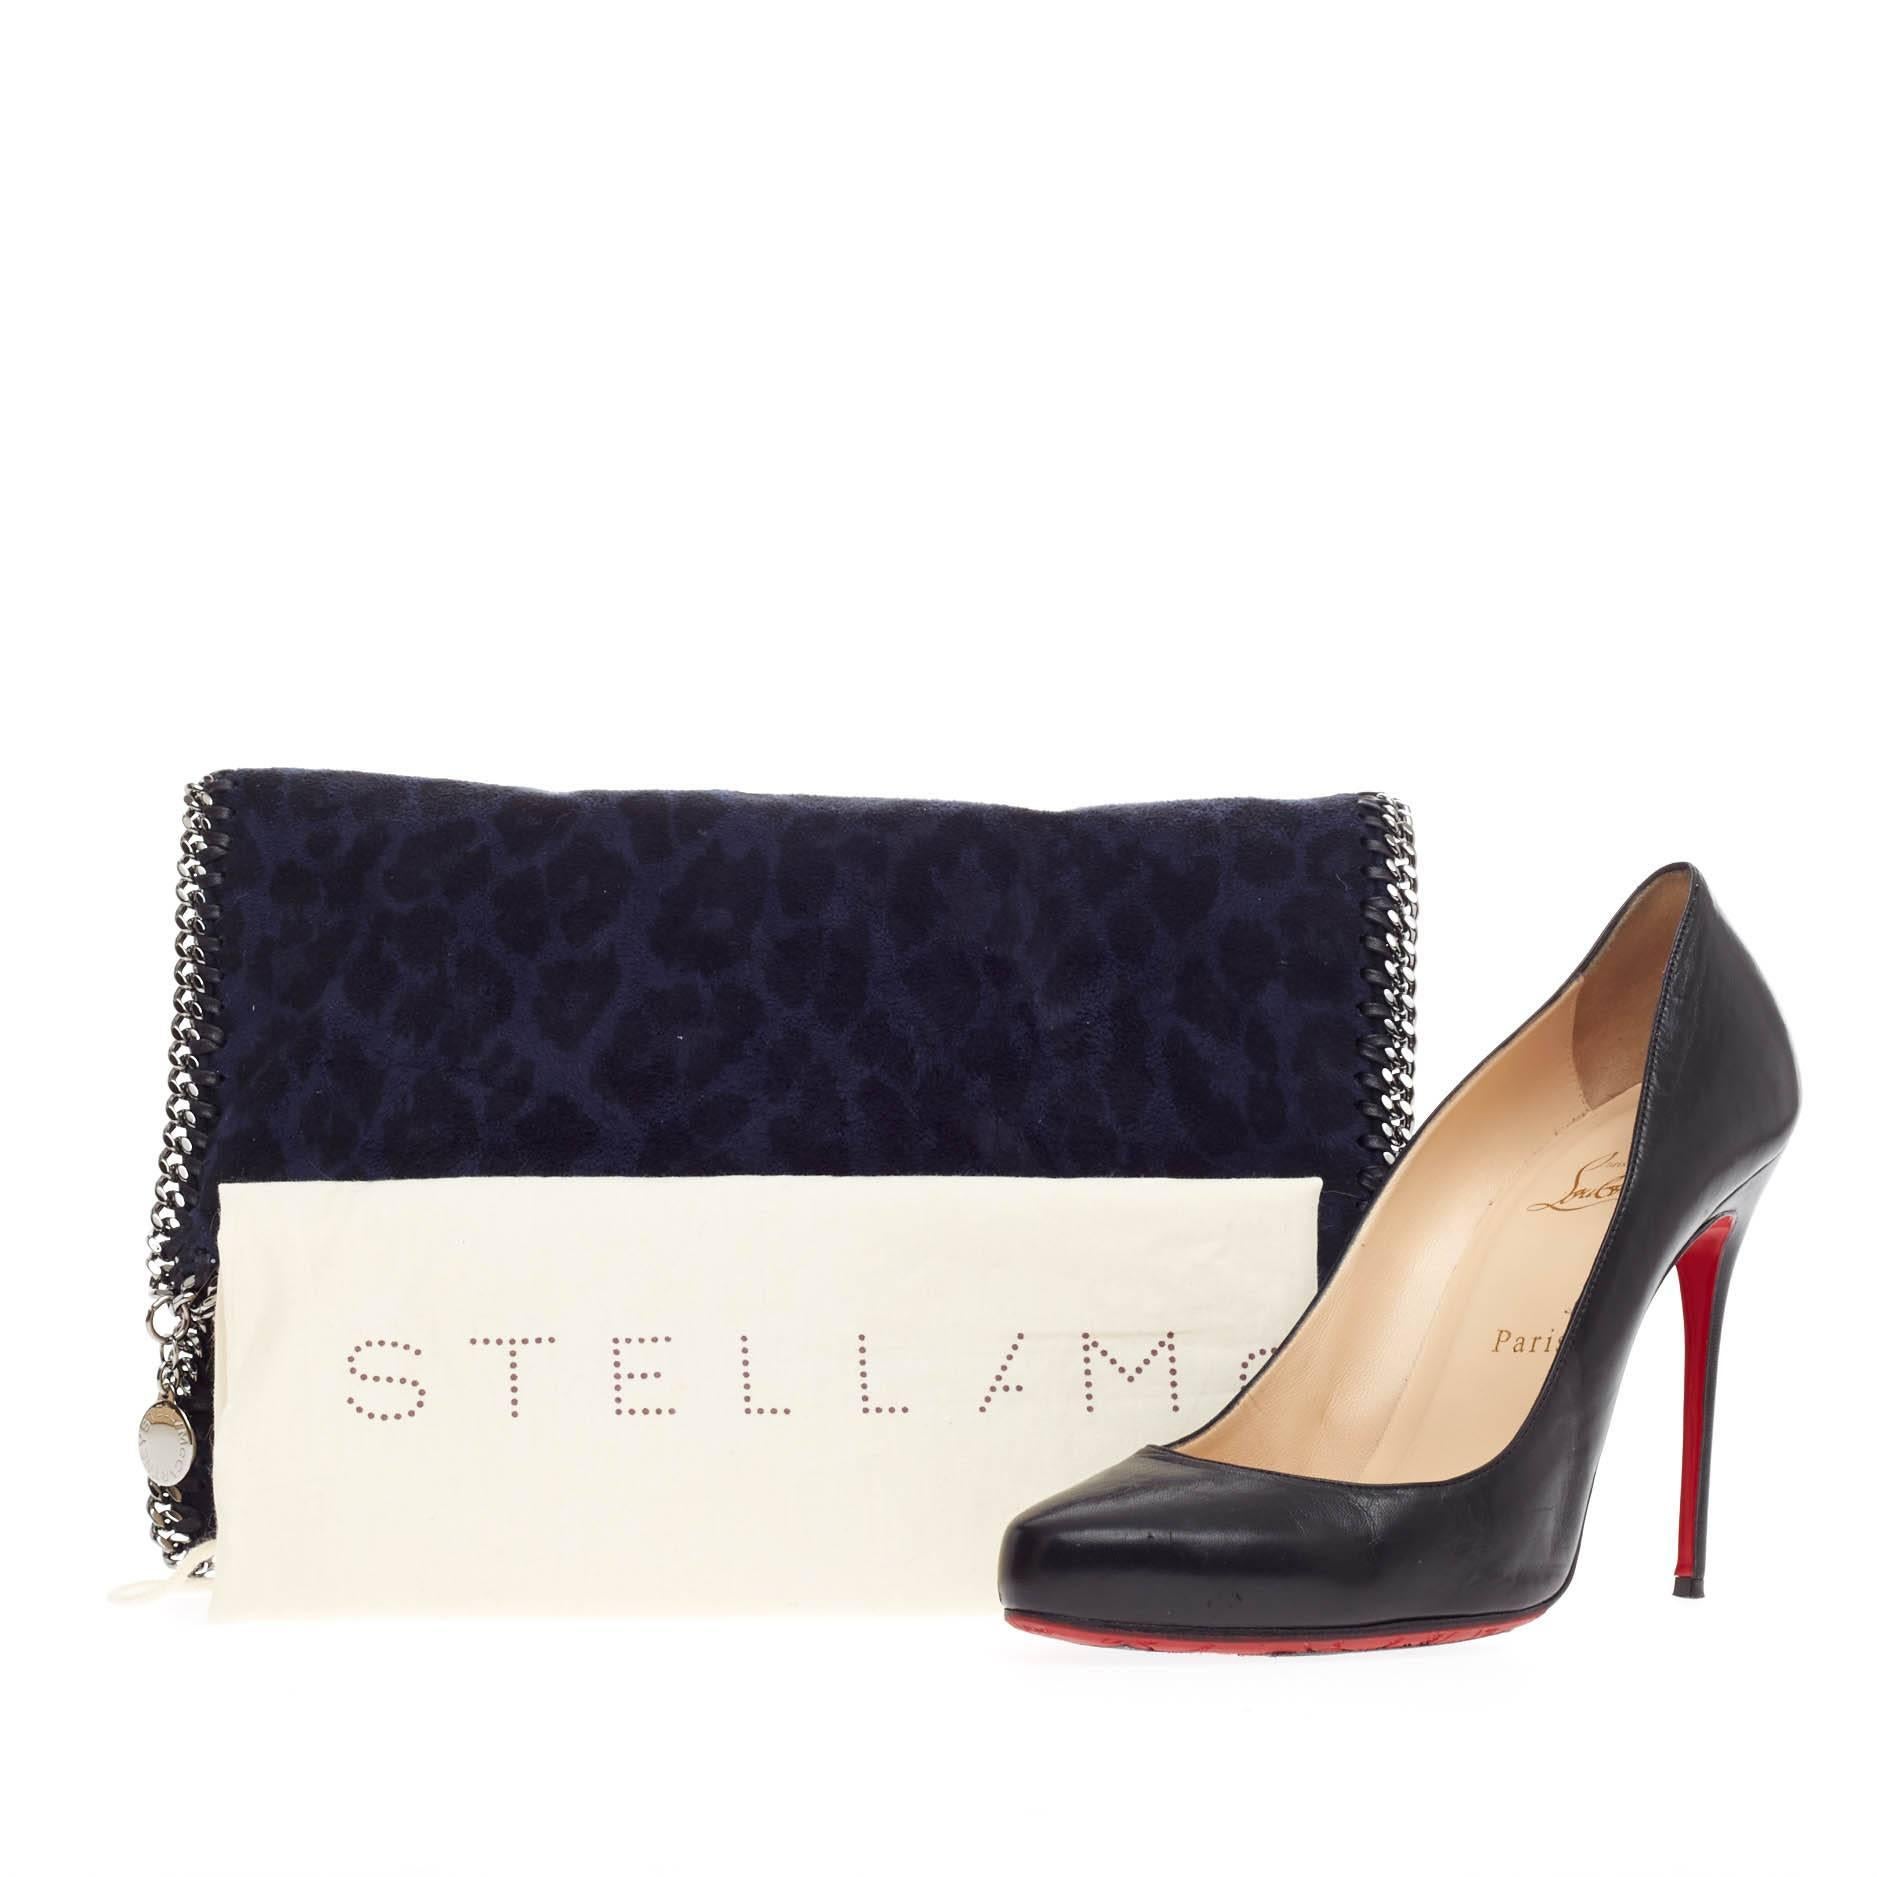 This authentic Stella McCartney Falabella Fold Over Clutch Leopard Print Faux Suede is perfectly textured with classic black and blue faux leopard print suede that is chic with a twist. This fold over clutch features silver chain link handles and